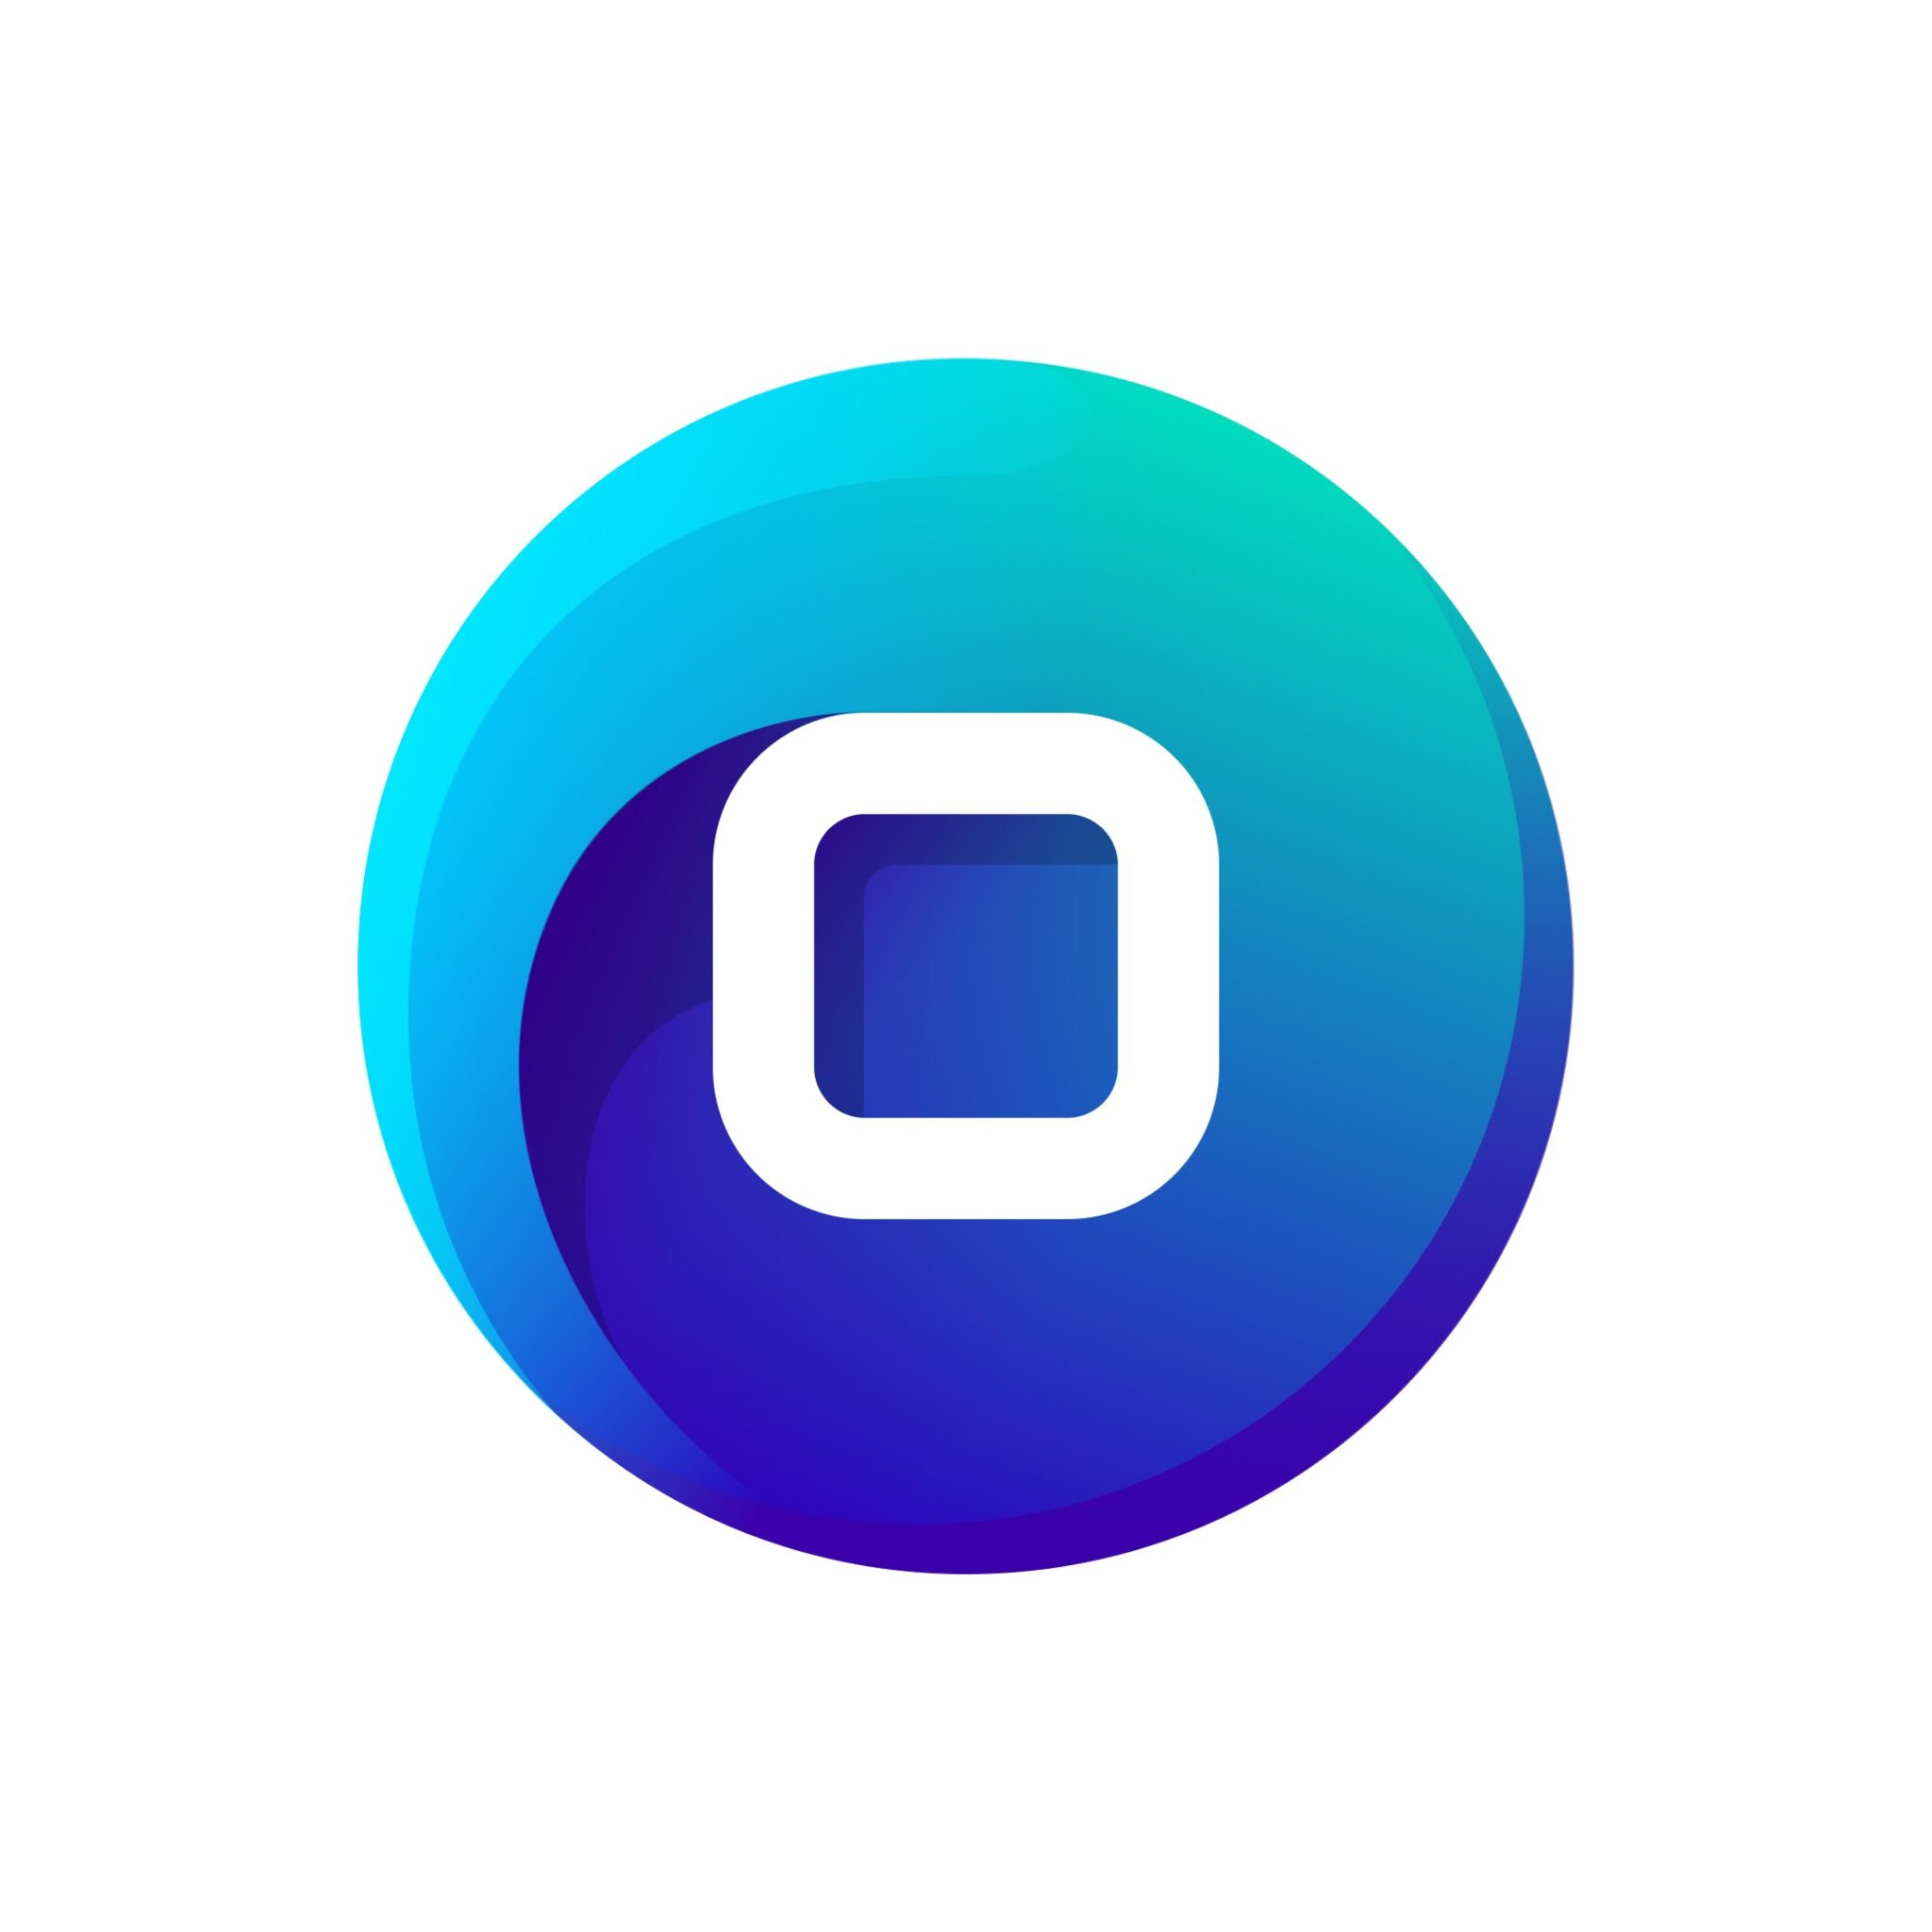 OneLaunch for android instal